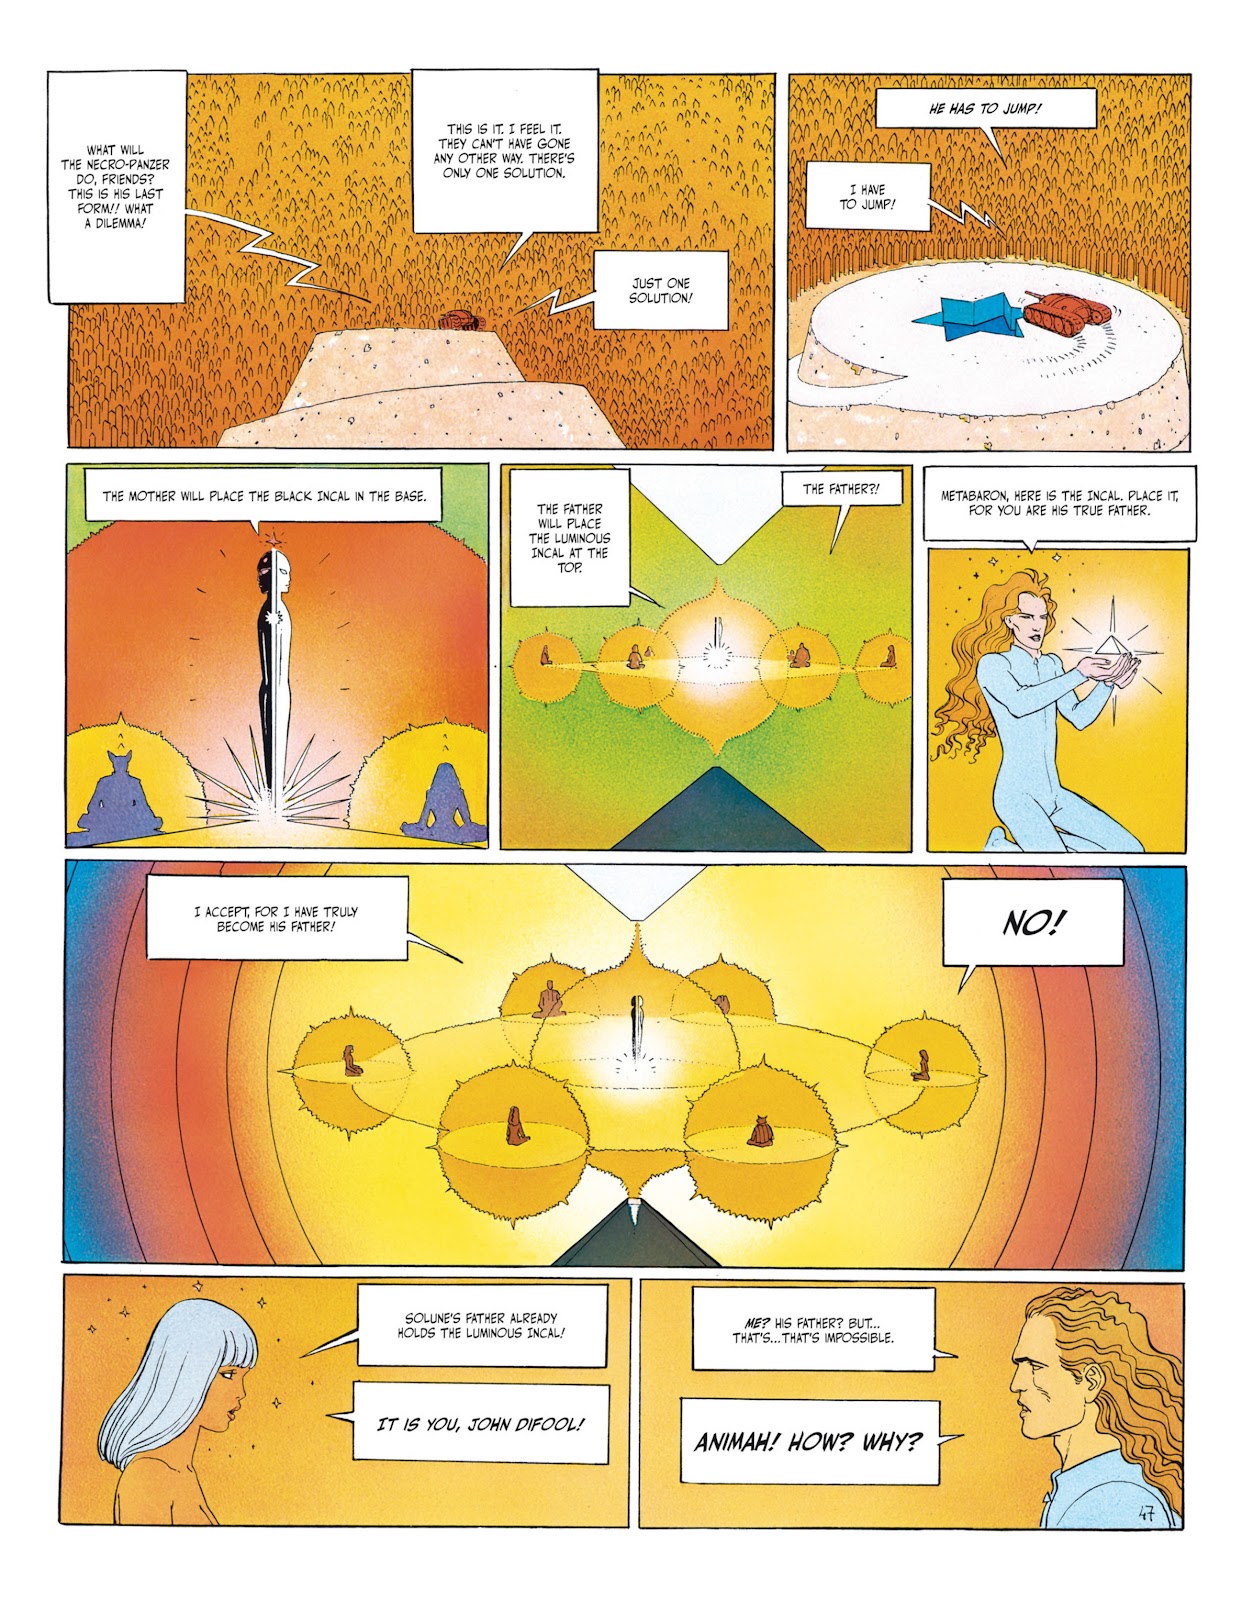 Page from the Incal. Abstract alchemical imagery accompanies John learning he's a dad.